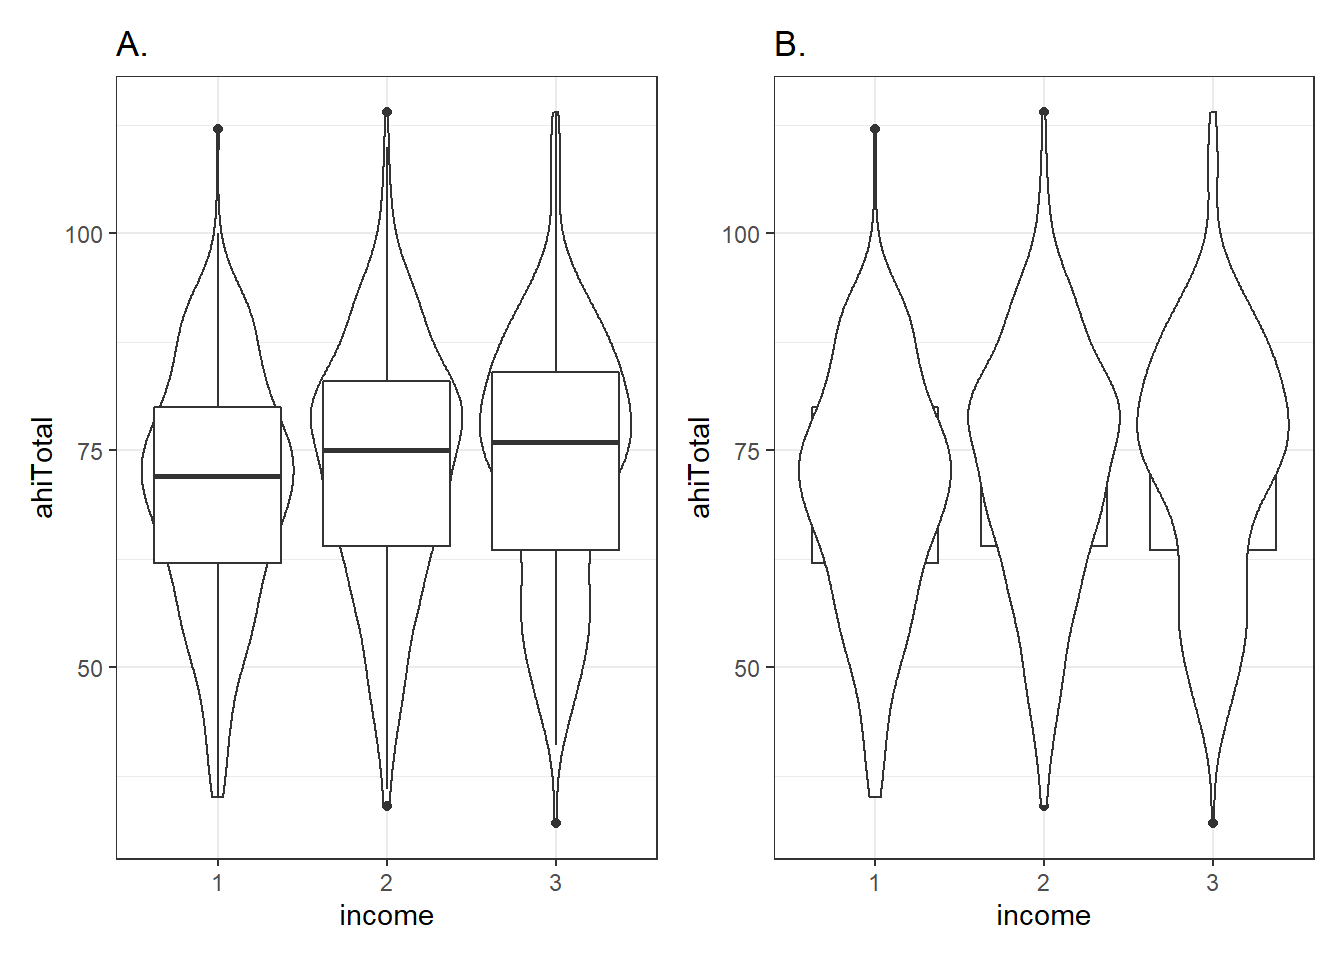 Showing the impact of changing the order of layers. Figure A shows the boxplots on top of the violin plots. Figure B shows the violins on top of the boxplots. The codes are the same but the order of the geoms is different.